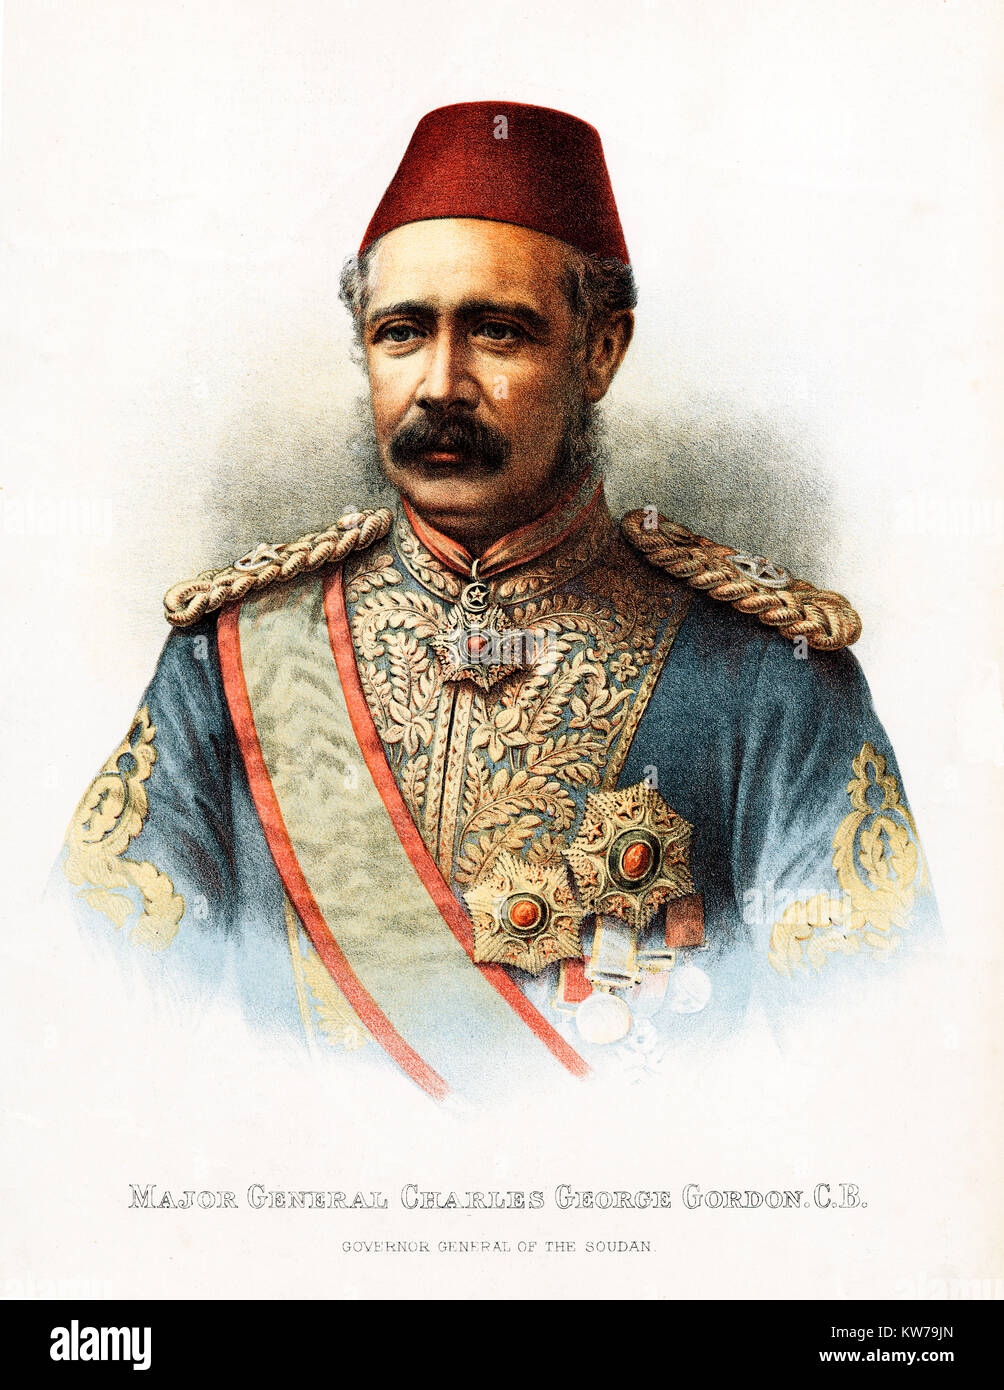 Major-General Gordon, 1885 portrait of the Governor General of the Sudan, killed by the Mahdi at the end of the siege of Khartoum Stock Photo